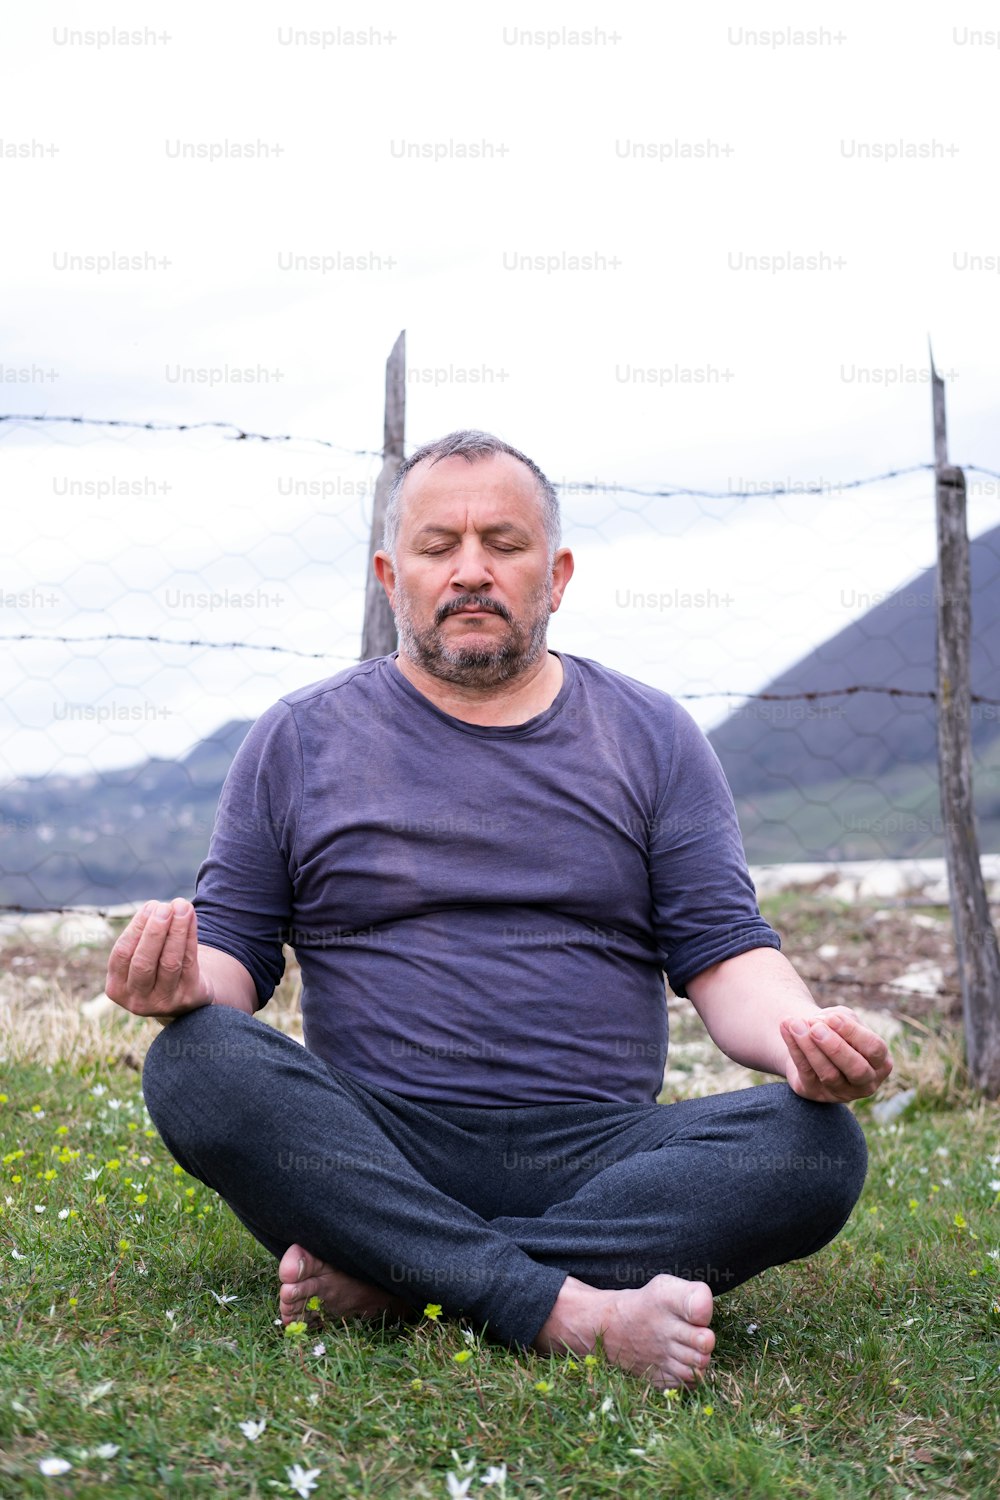 a man sitting in a yoga position in the grass